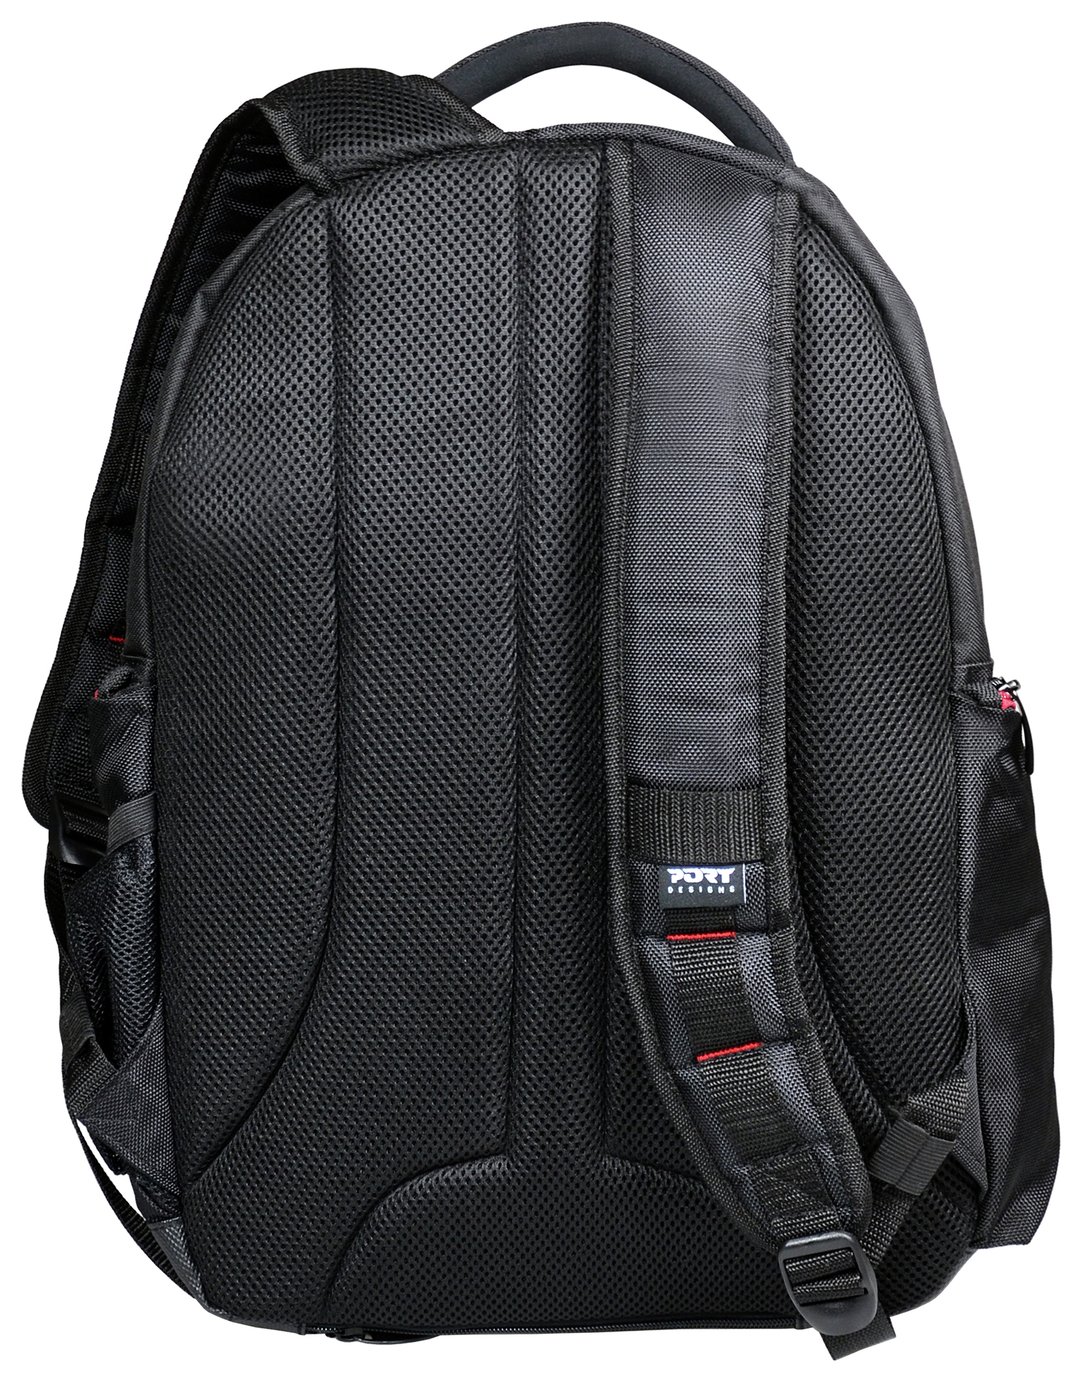 Port Designs Courchevel 15.6 Inch Laptop Backpack Review